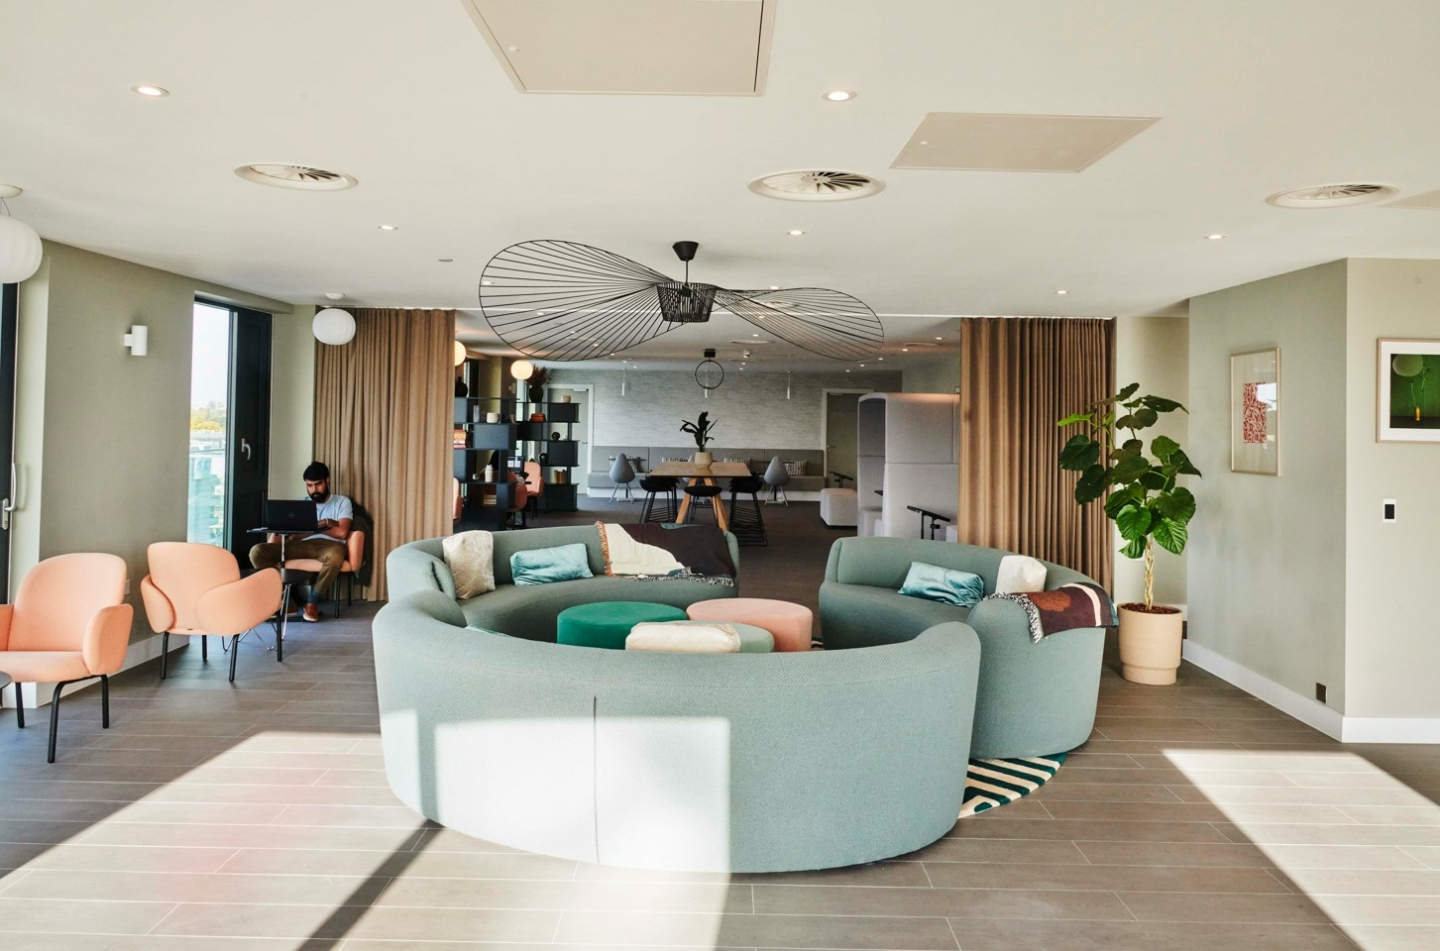 Communal lounge, curved sofas, modern lighting and plants